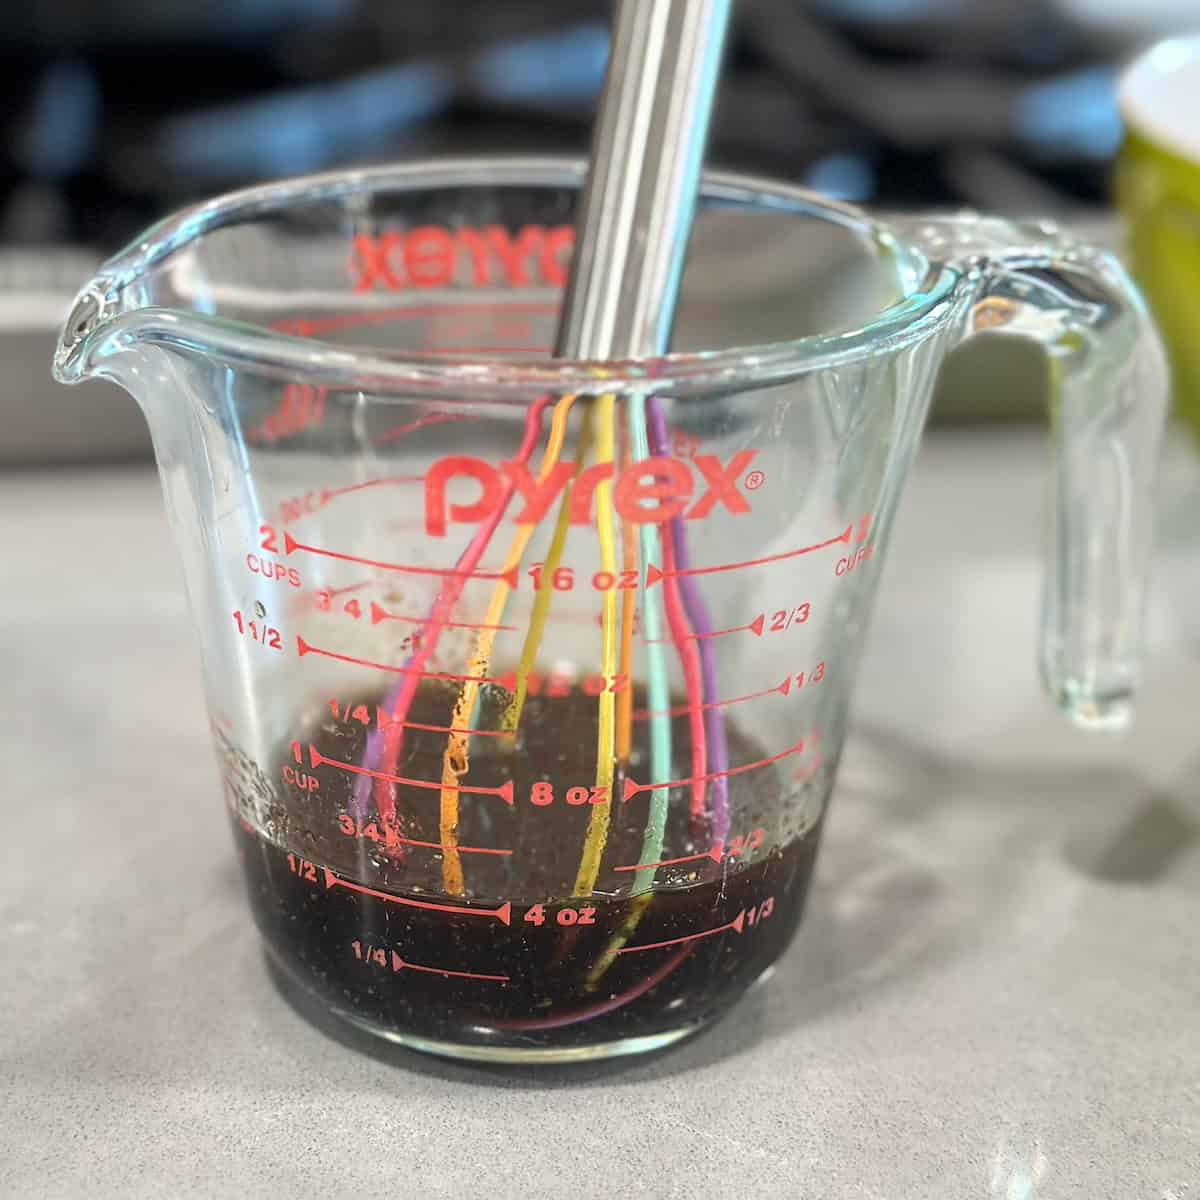 2 cup pyrex of balsamic vinaigrette with rainbow colored whisk